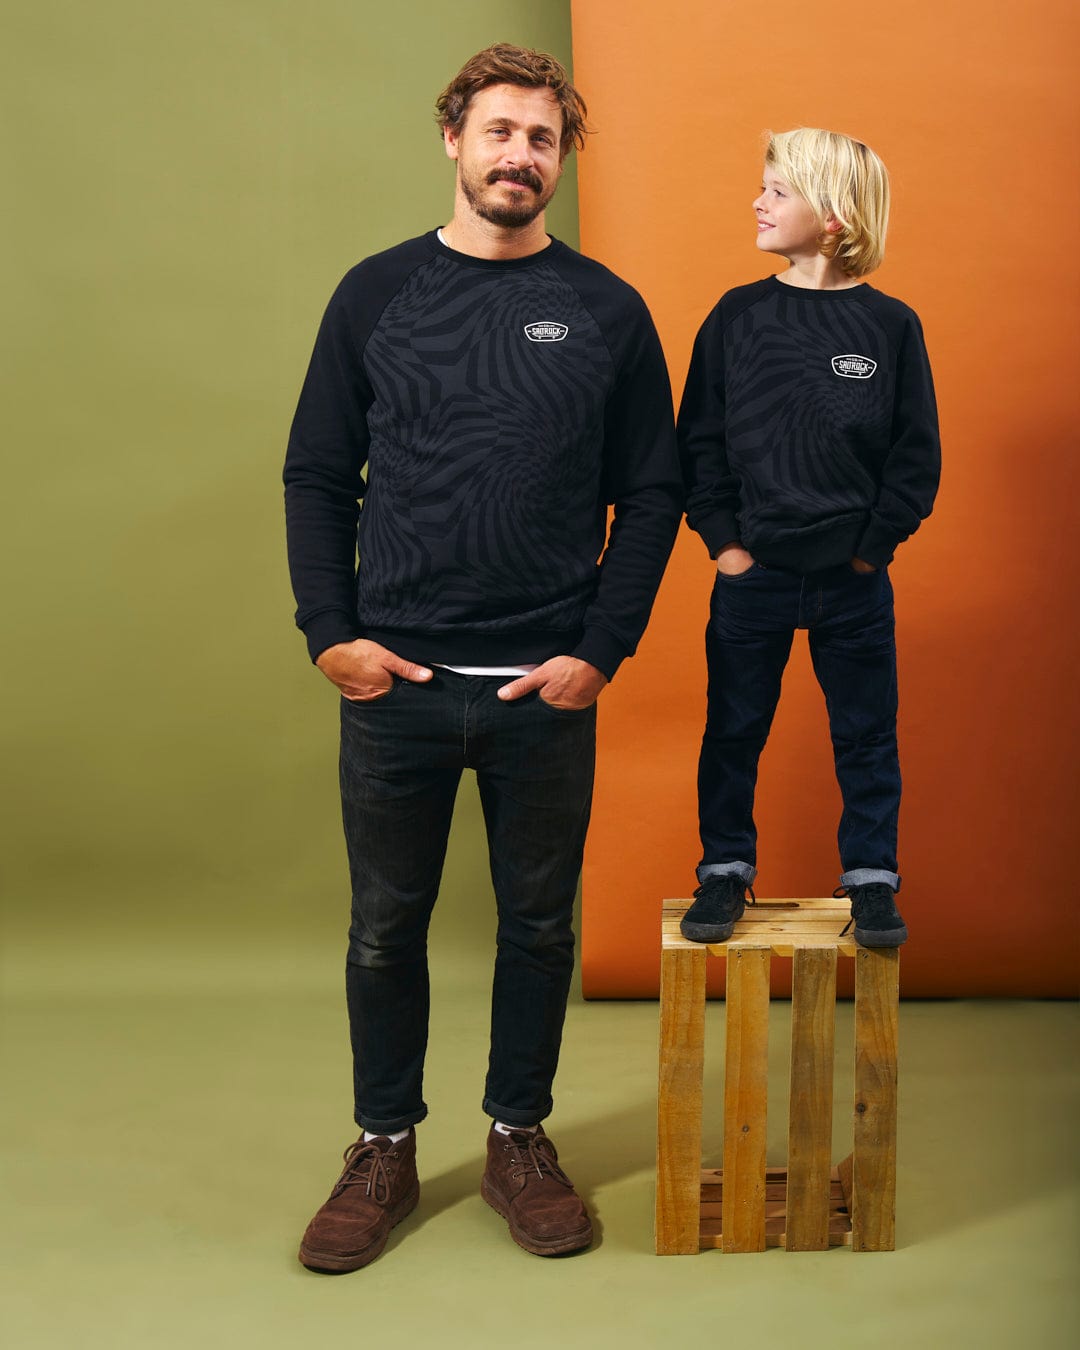 A man and a boy showcasing Saltrock branding on top of a wooden box featuring the Grip It - Kids Crew Neck Sweat - Black.